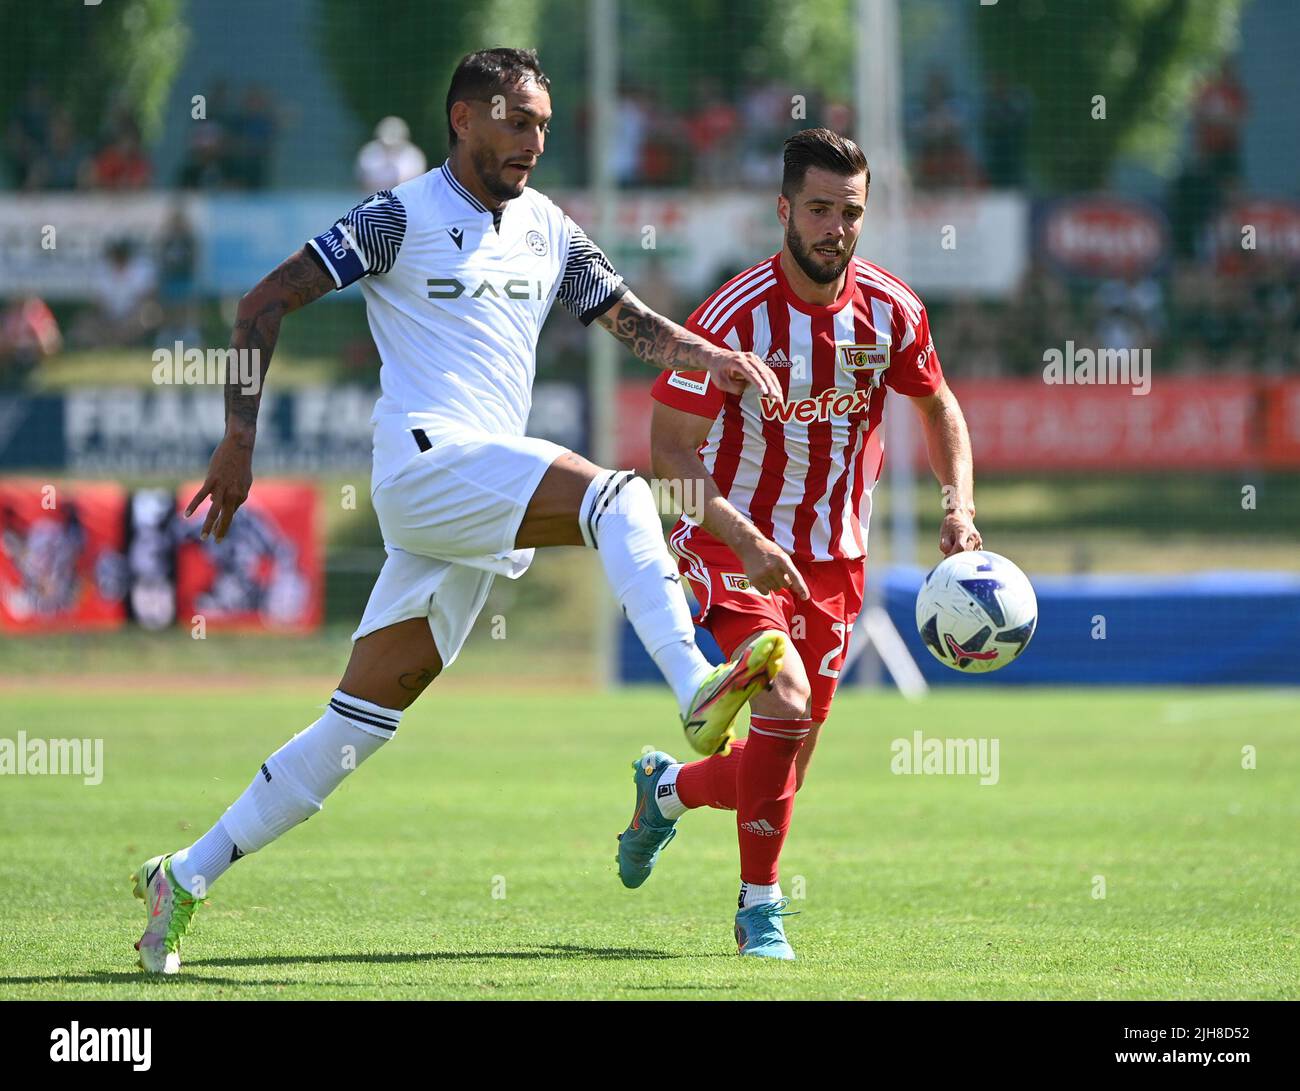 Lienz, Austria. 16th July, 2022. Soccer: Test matches, 1. FC Union Berlin - Udinese Calcio at Dolomitenstadion Lienz: Beto of Udinese Calcio (l), in a duel with Berlin's Niko Gießelmann. Credit: Matthias Koch/dpa/Alamy Live News Stock Photo